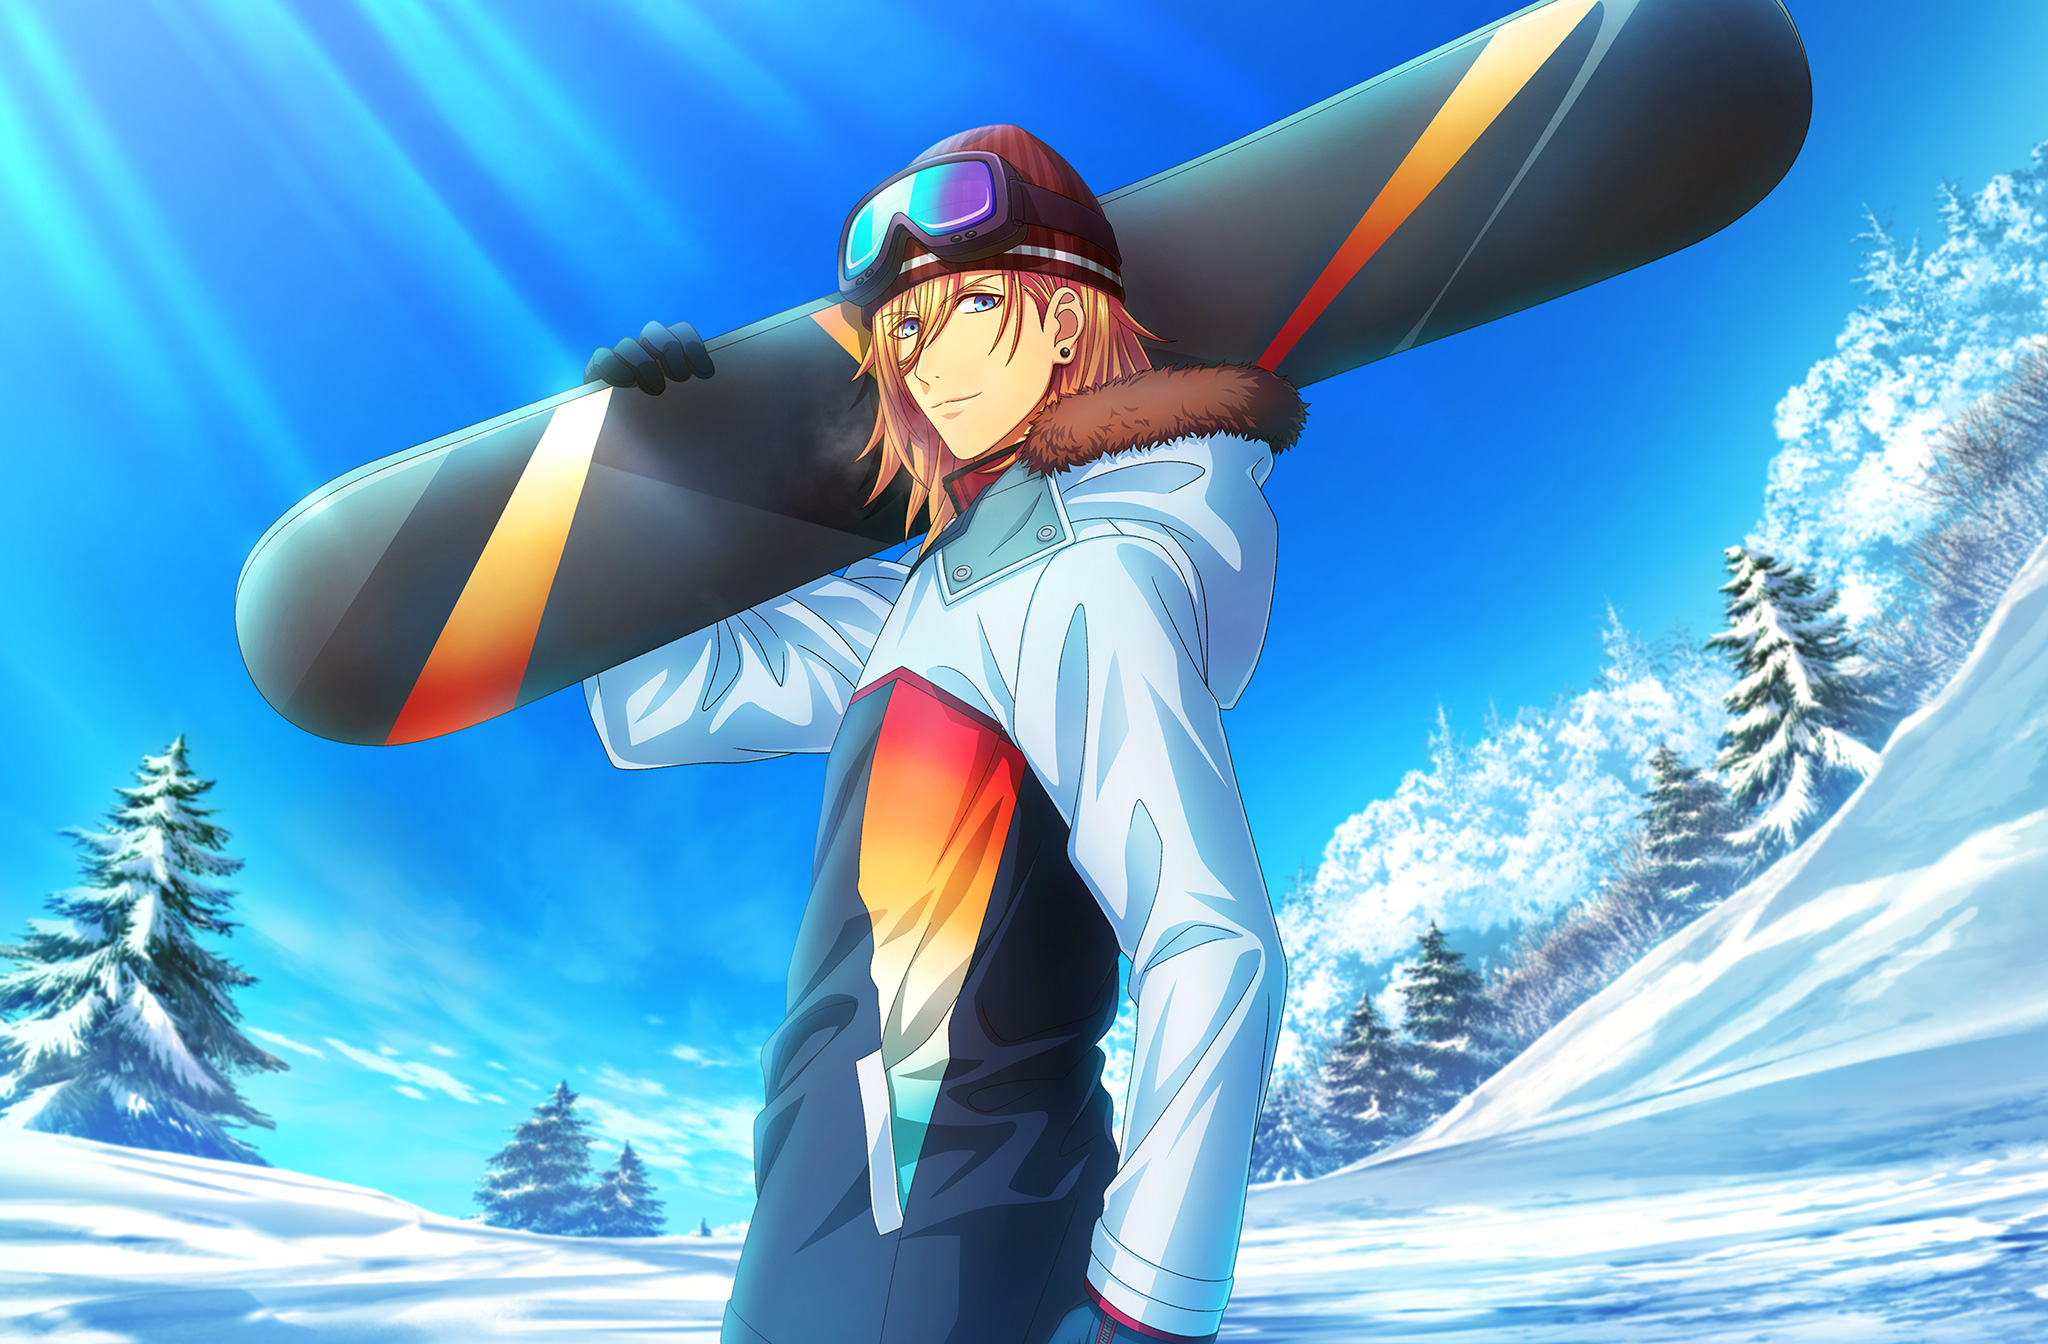 Render Anime And Manga - Anime Snowboarder Transparent PNG - 1147x1000 -  Free Download on NicePNG